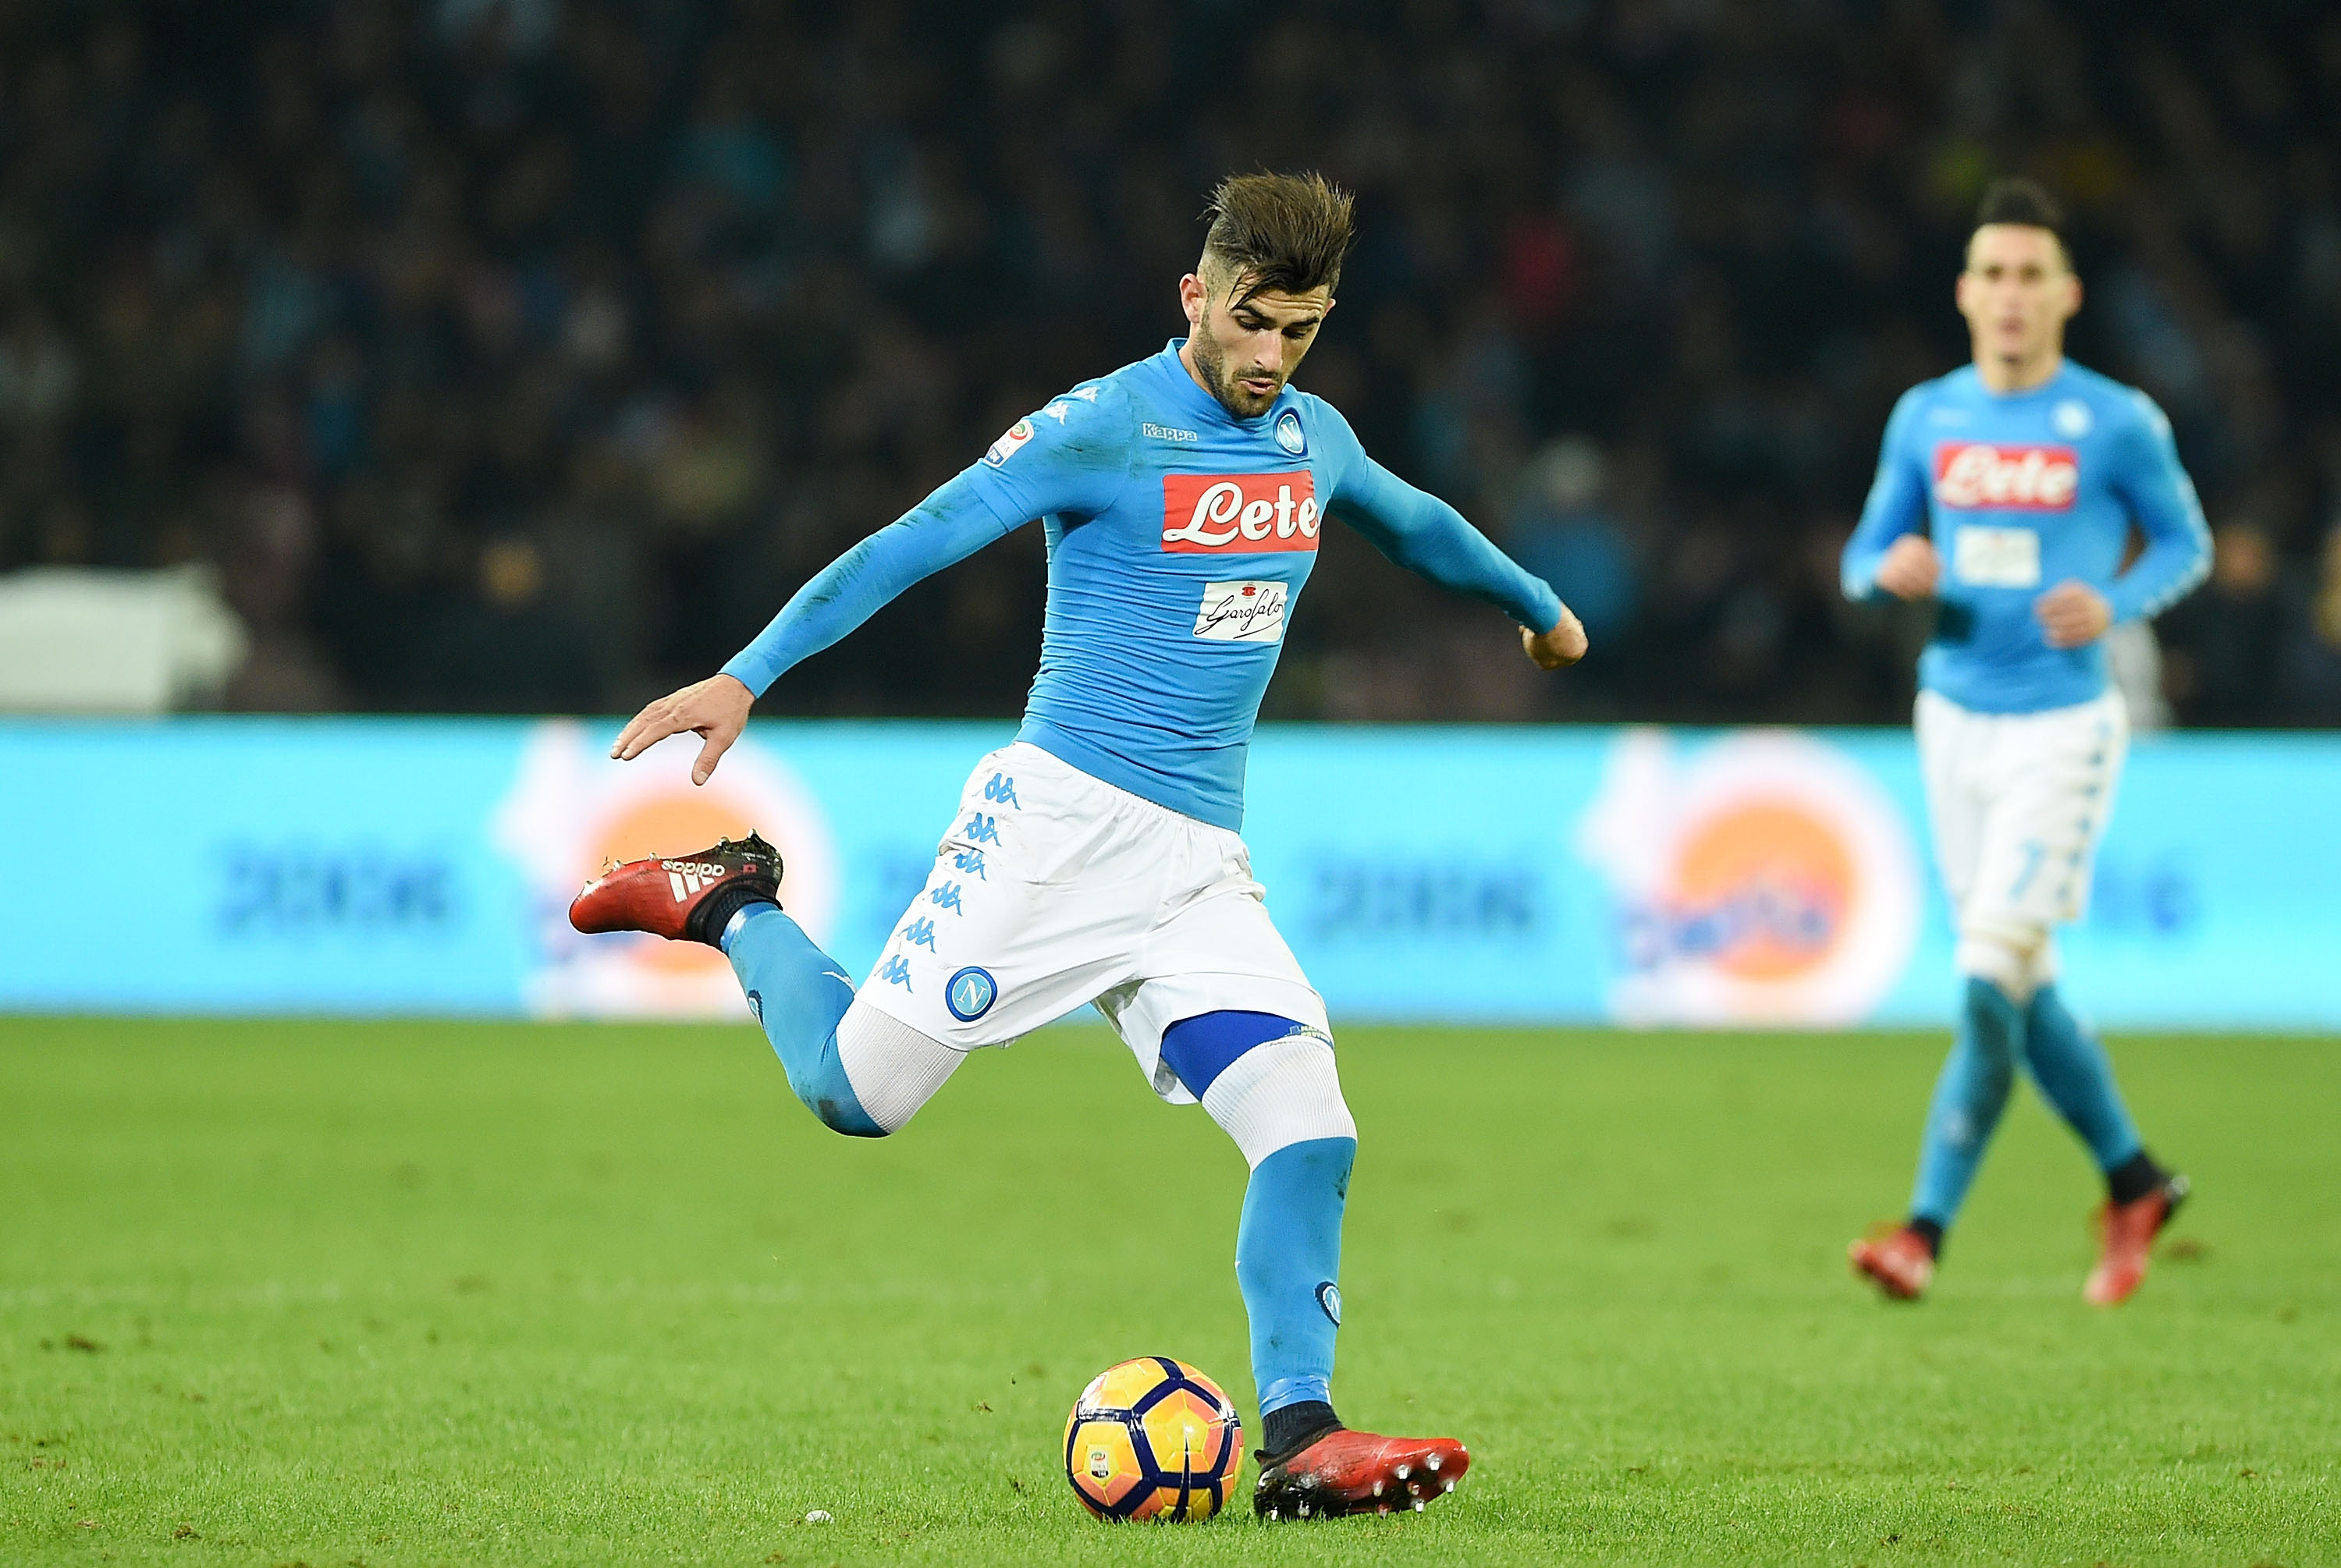 NAPLES, ITALY - NOVEMBER 28:  Elseid Hysaj of SSC Napoli in action during the Serie A match between SSC Napoli and US Sassuolo November 28, 2016 in Naples, Italy.  (Photo by Francesco Pecoraro/Getty Images)